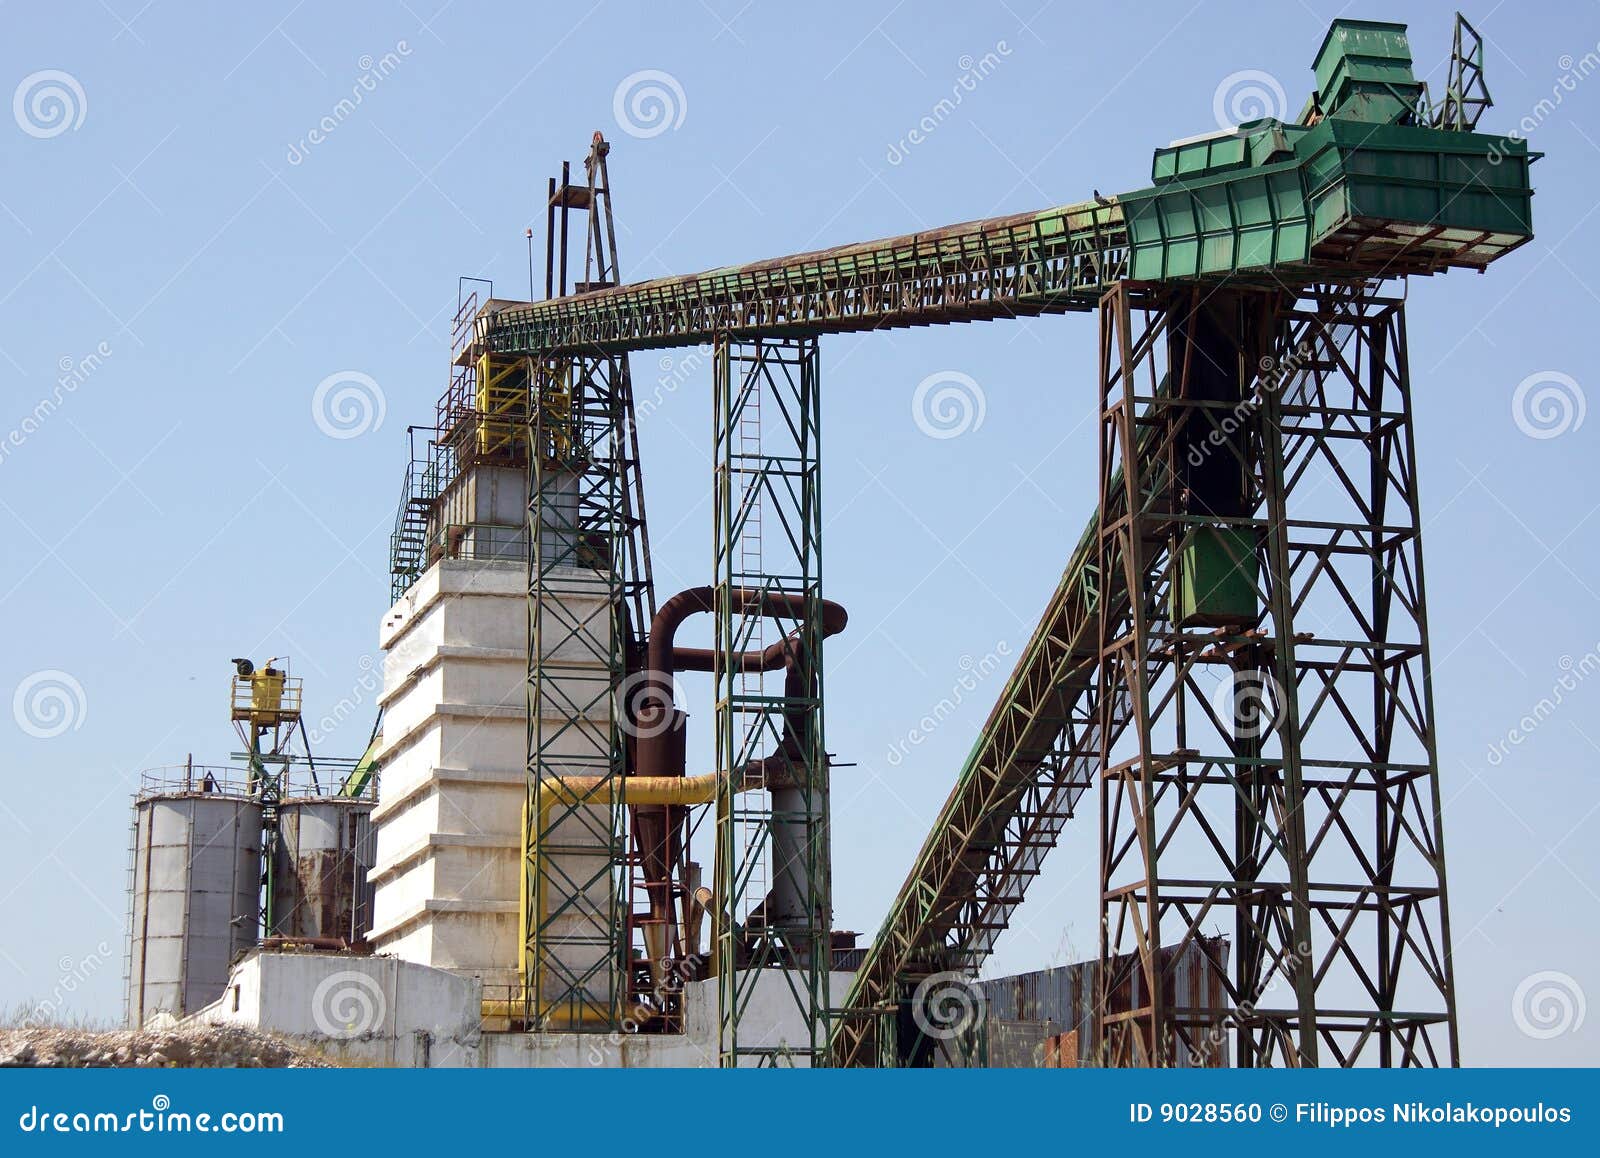 Cement plant stock photo. Image of work, tower, industry - 9028560